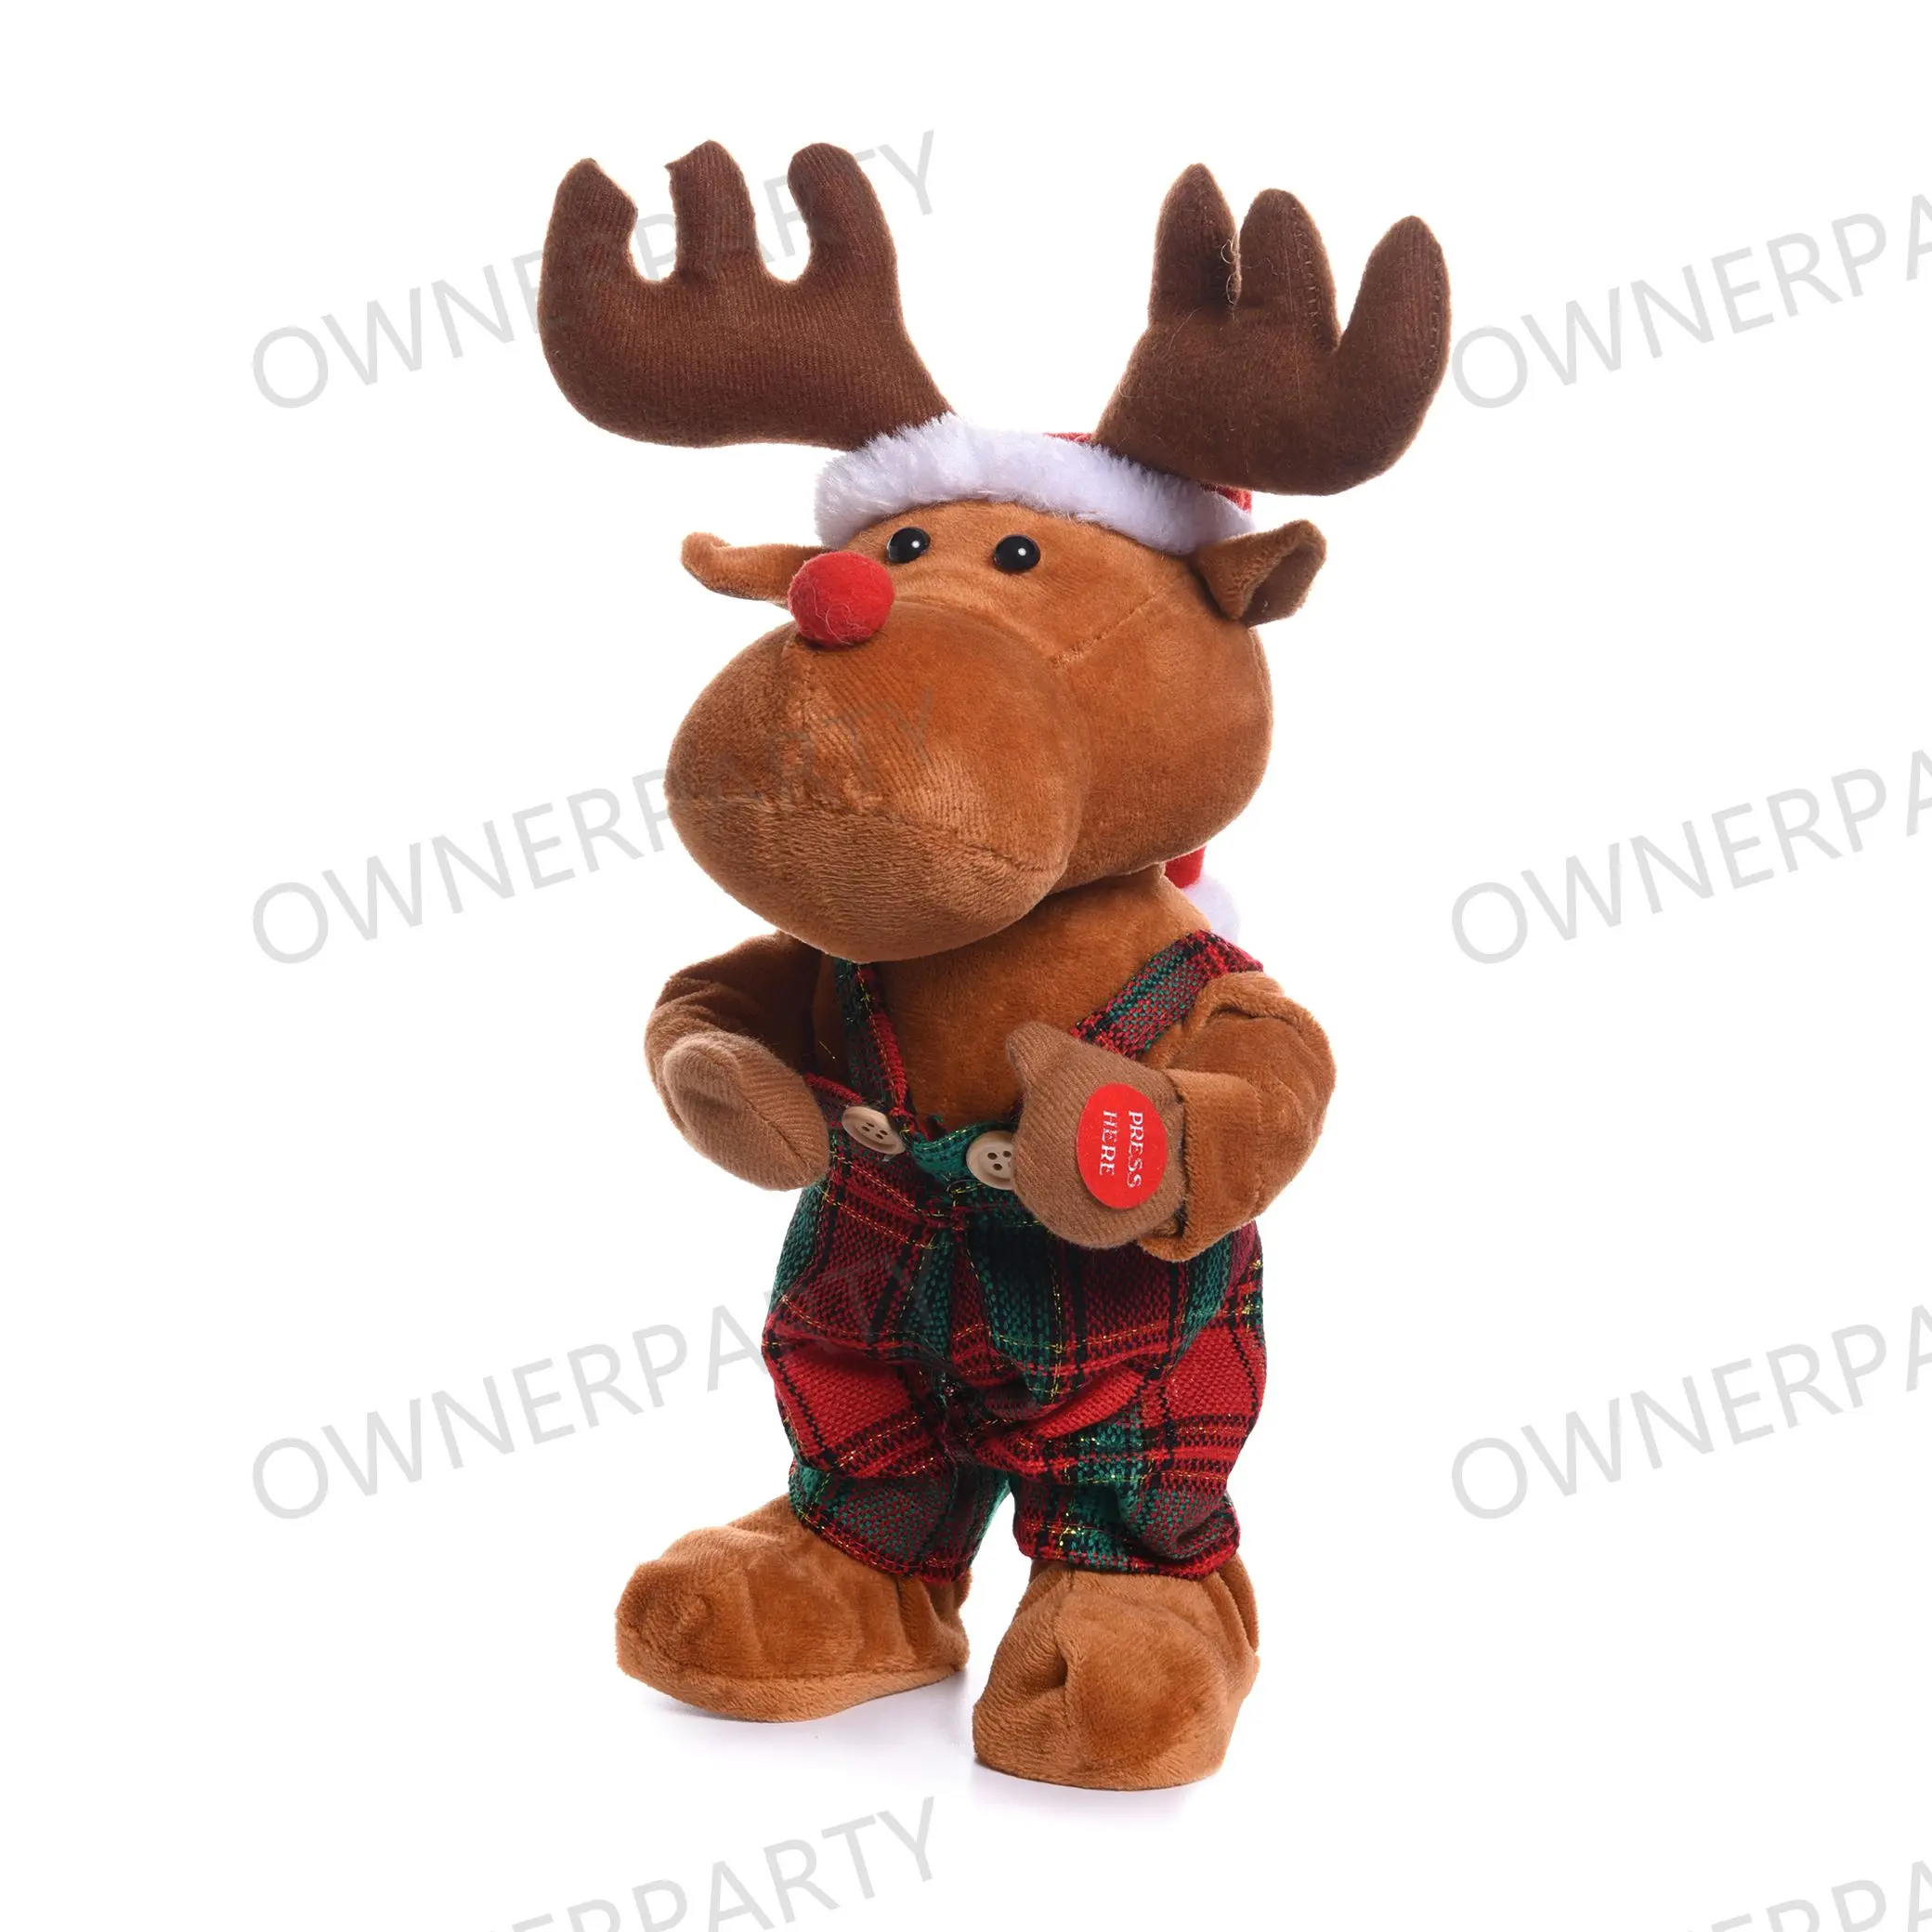 Indoor Dancing Reindeer Christmas Gifts Decorations Christmas Decoration Supplies For Home Party Xmas Decor